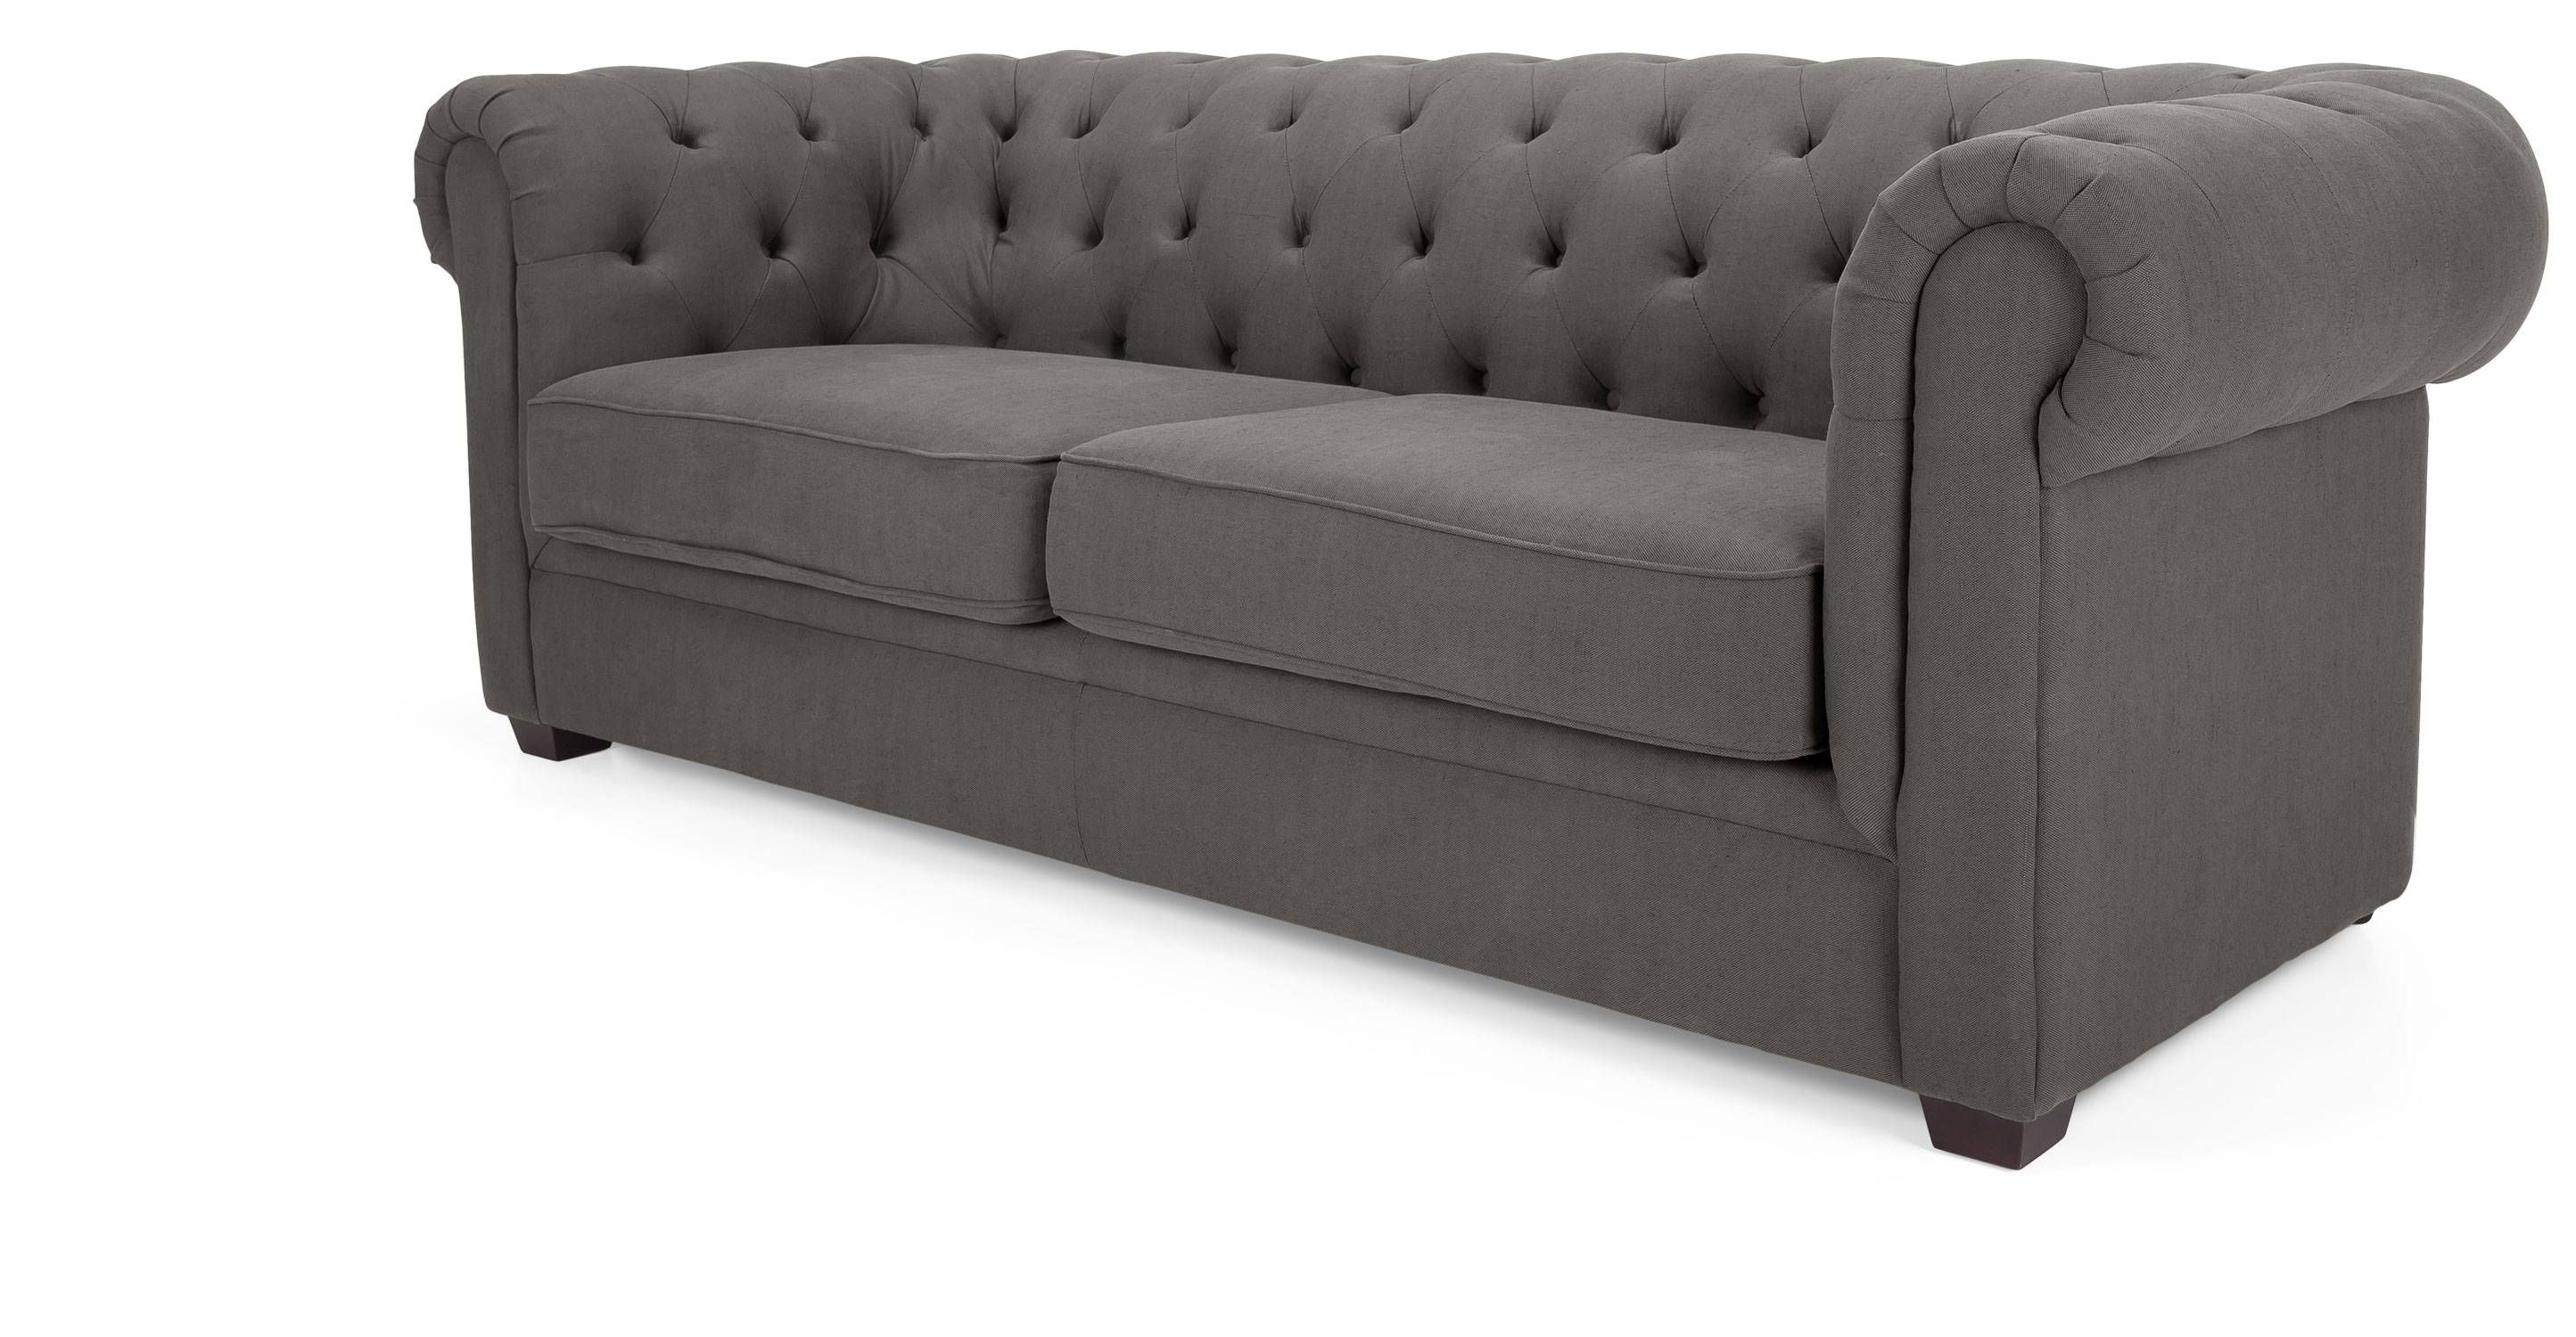 Furniture: Enchanting Chesterfield Couch For Living Room Furniture With 3 Seater Sofas For Sale (View 22 of 30)